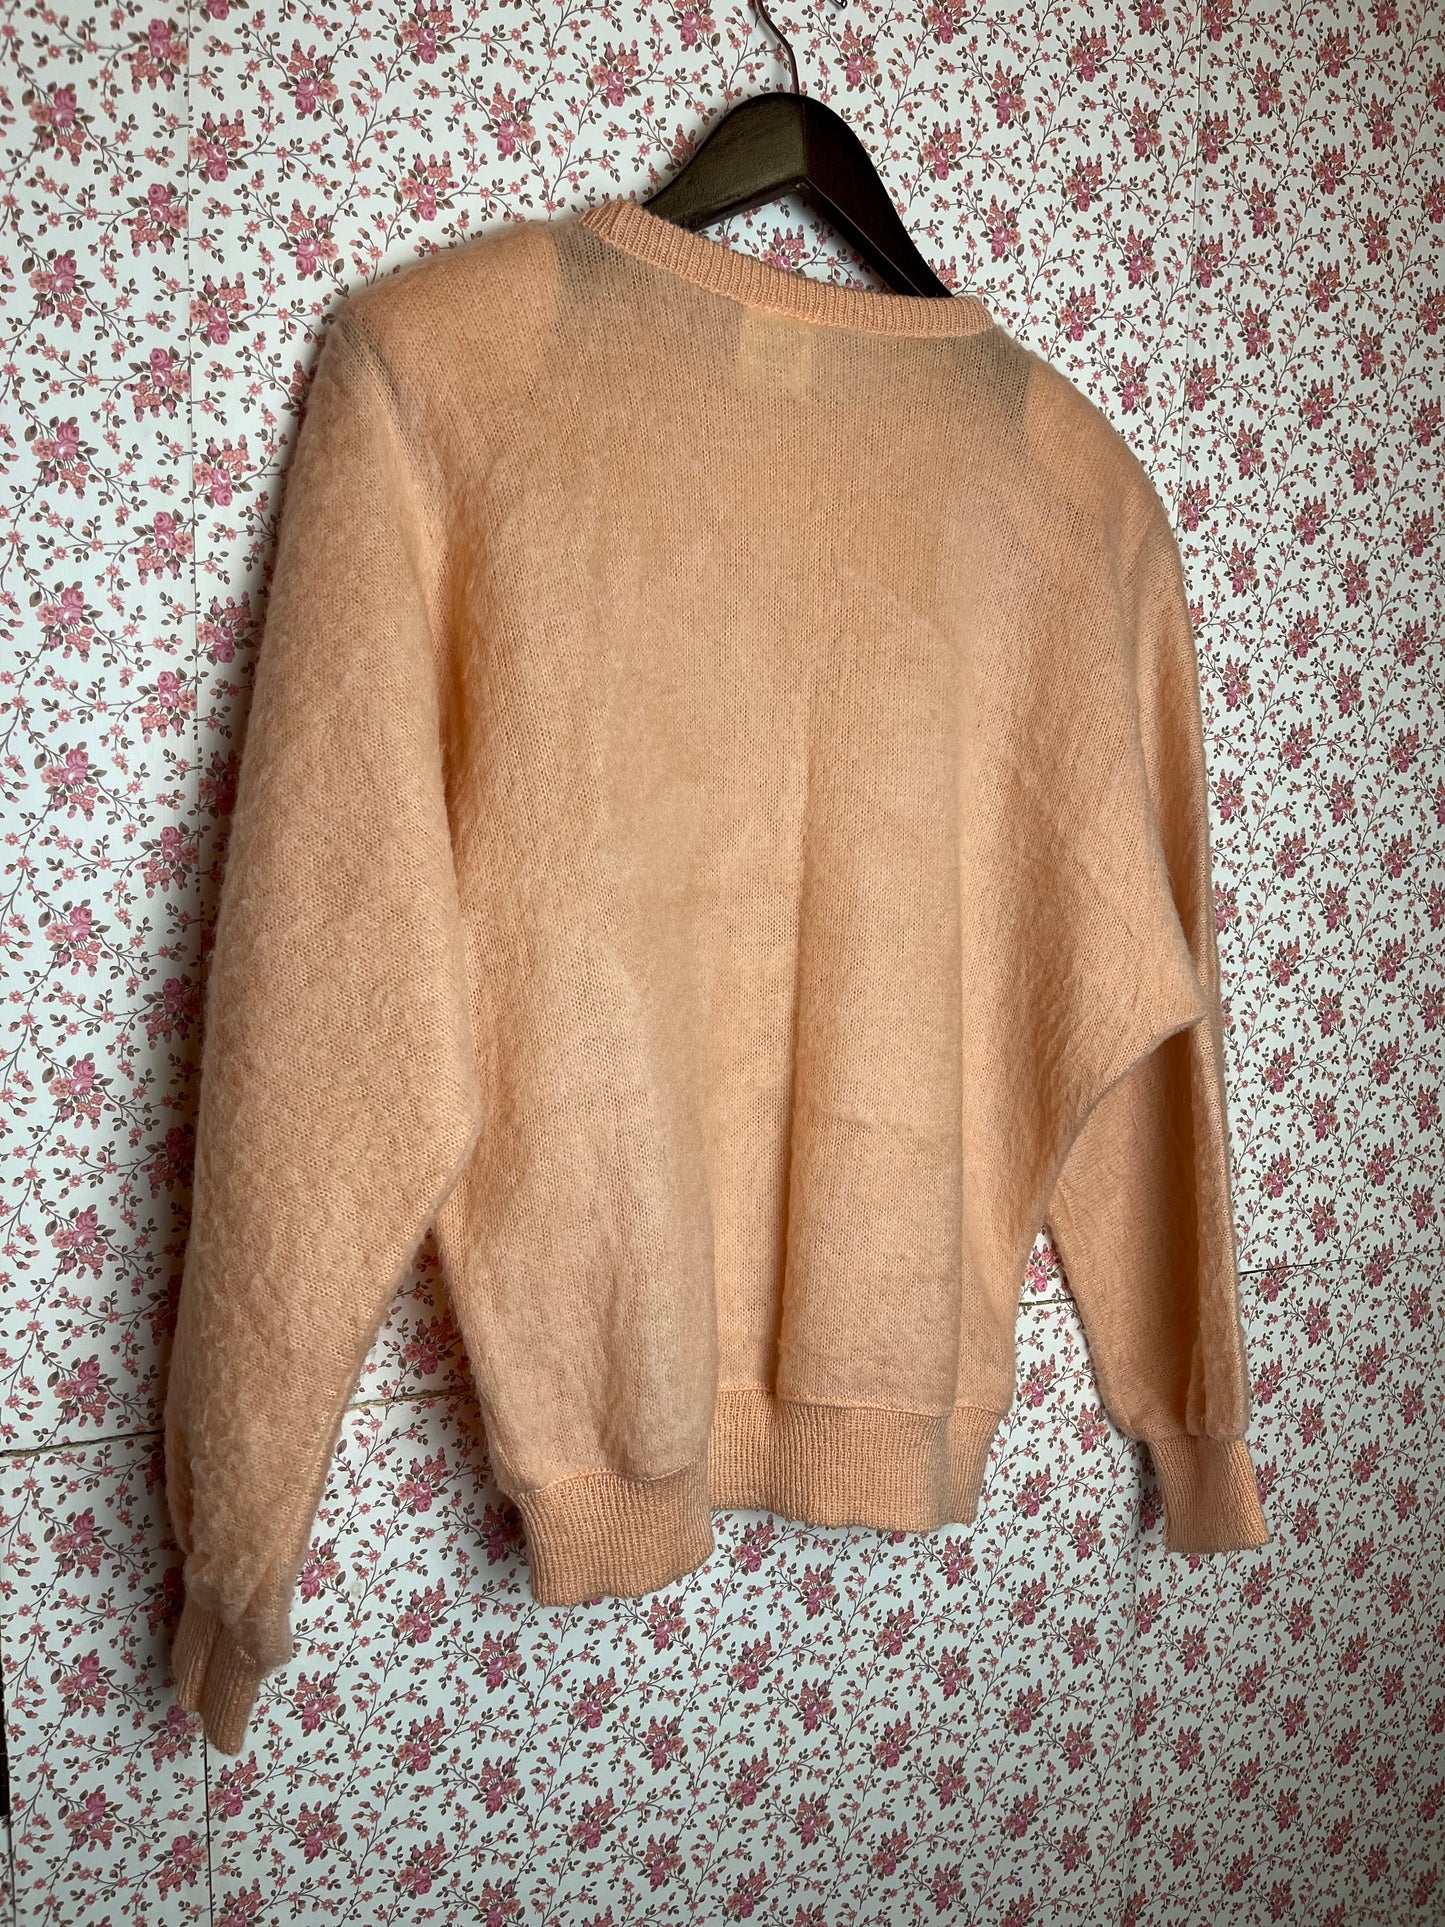 Vintage 1980s Peach Knit Jumper with Bows